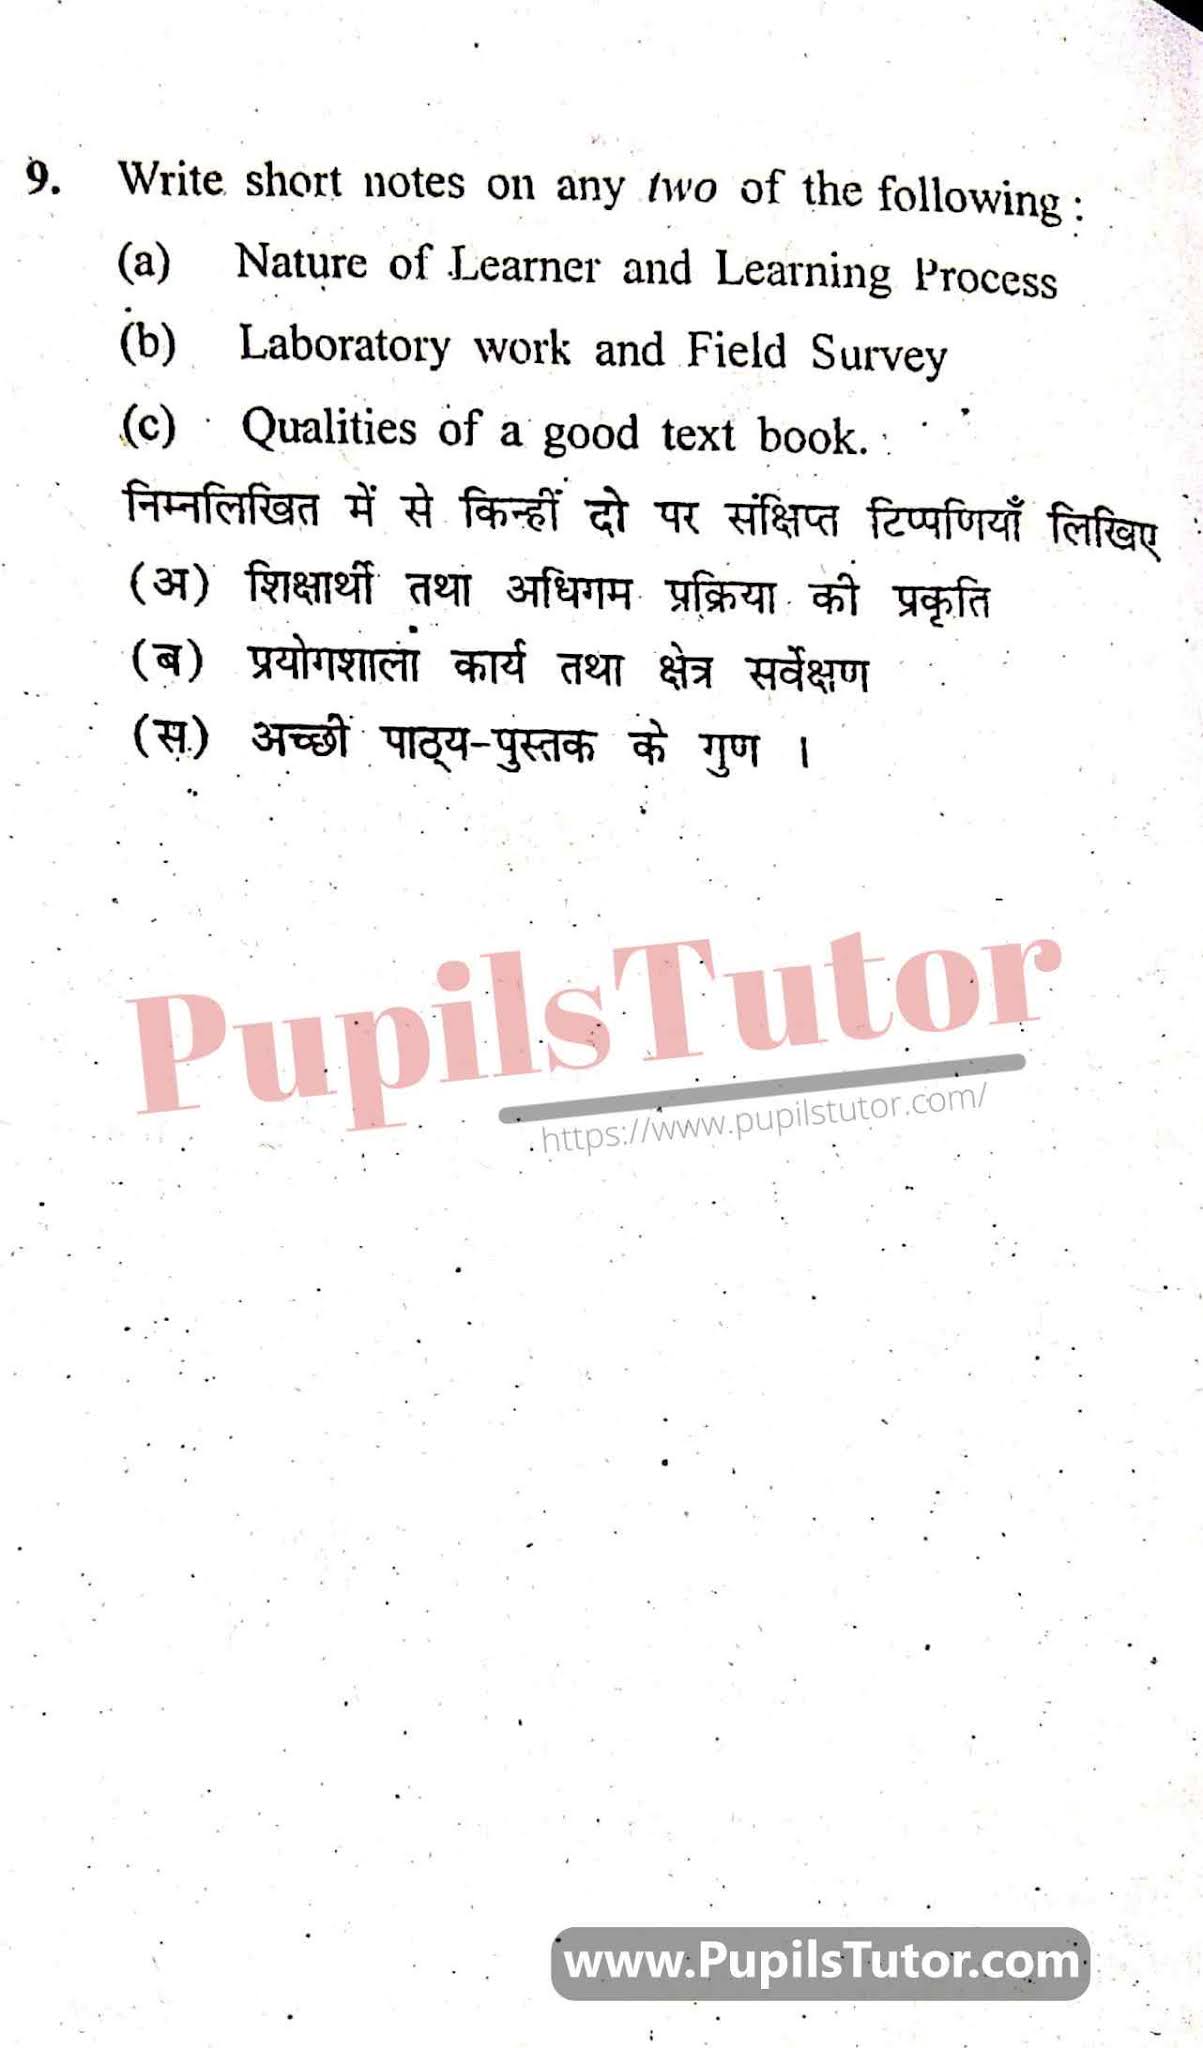 KUK (Kurukshetra University, Haryana) Knowledge And Curriculum Question Paper 2019 For B.Ed 1st And 2nd Year And All The 4 Semesters In English And Hindi Medium Free Download PDF - Page 4 - pupilstutor